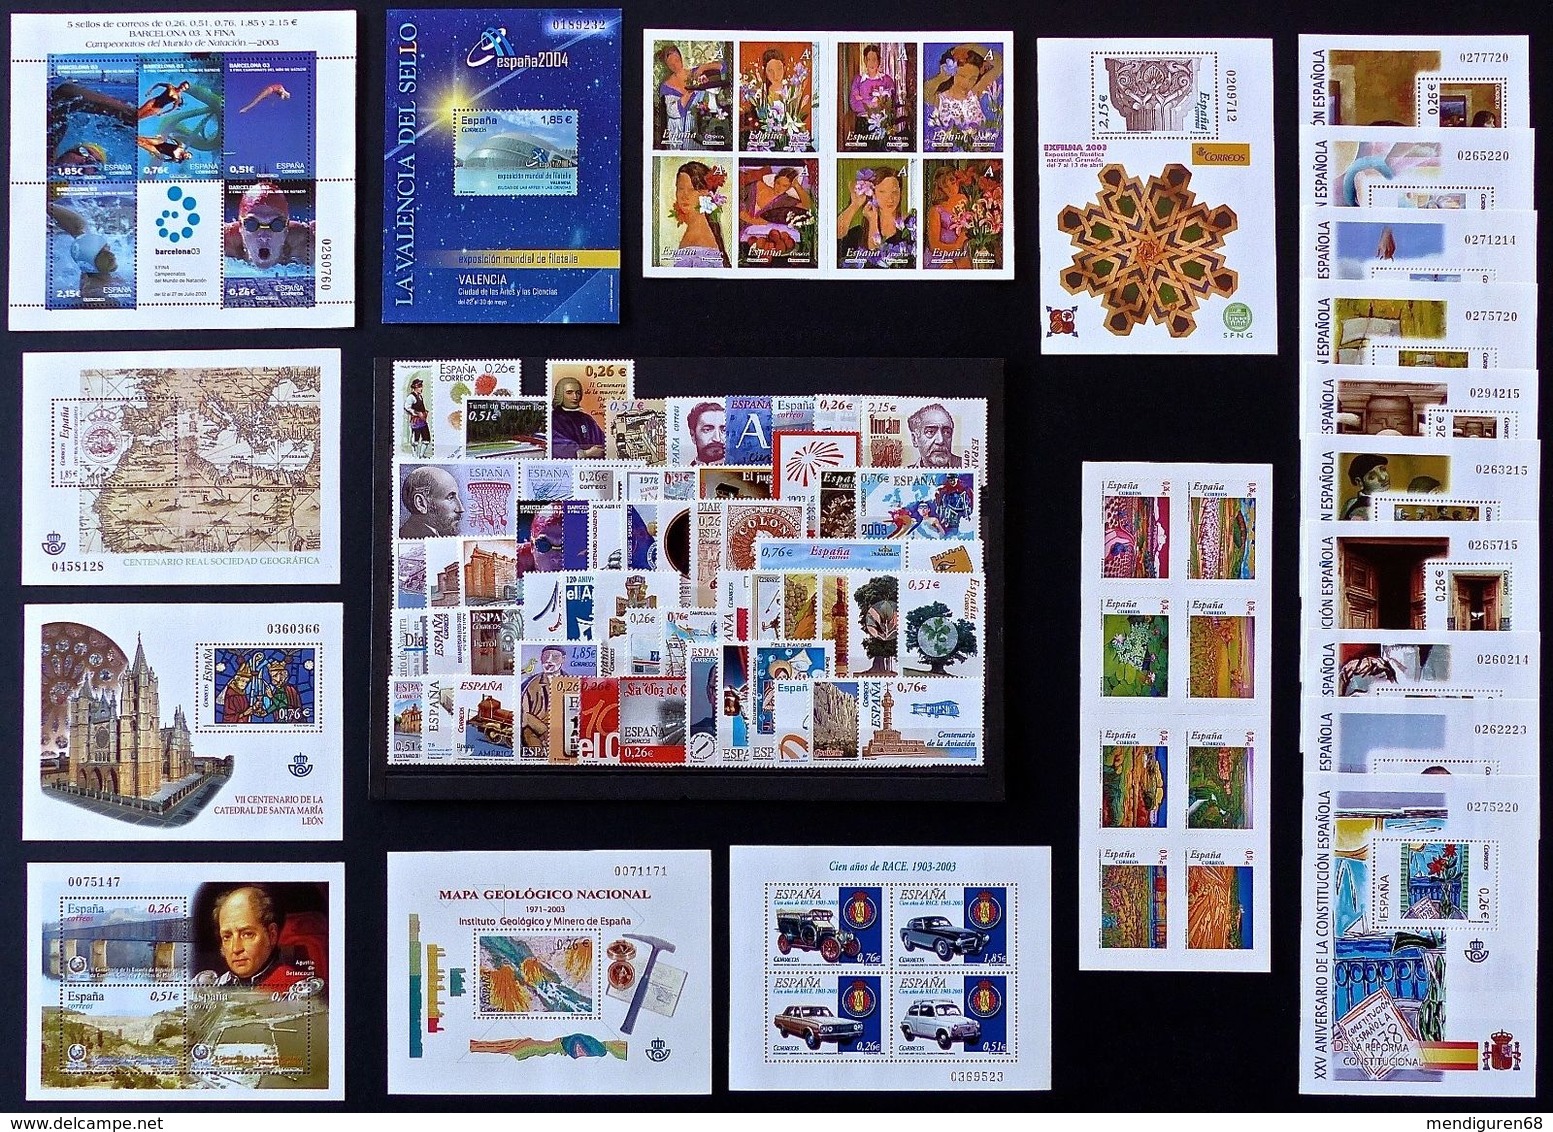 SPANIEN ESPAGNE ESPAÑA SPAIN 2003 FULL YEAR AÑO COMPLETO STAMPS, CARNET AND SHEETS, SELLOS, CARNET Y HOJAS BLOQUE MNH - Ganze Jahrgänge